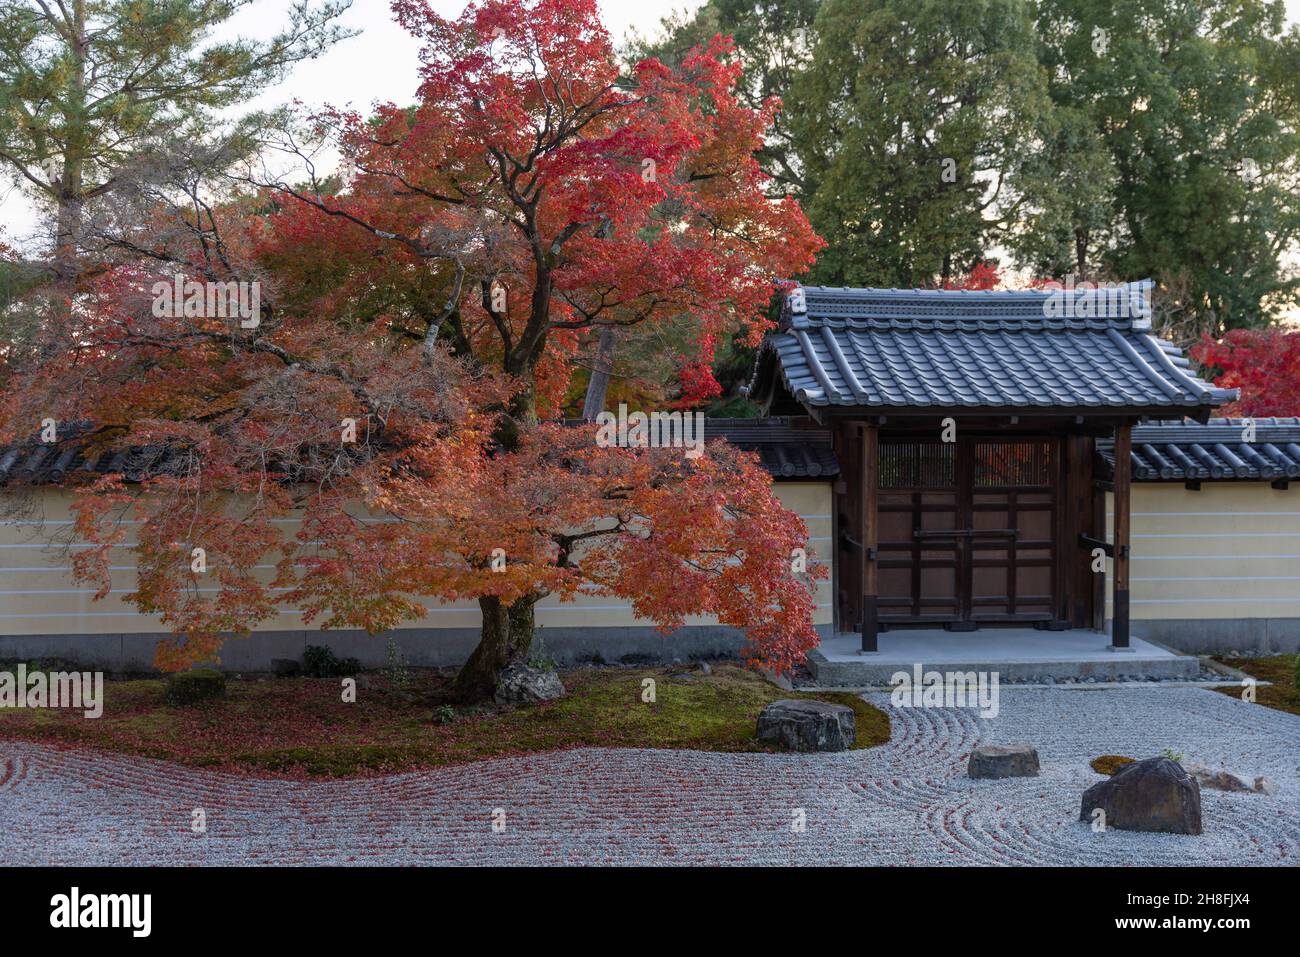 Kyoto, Japan. 26th Nov, 2021. The Zen garden with Momiji tree (Japanese Maple) is seen inside the Toji-in Temple.Toji-in was established in 1341 on the southern slope of Mount Kinugasa by the shogun Ashikaga Takauji. Fifteen shoguns came from the Ashikaga clan making the Toji-in temple rich in historical artifacts and artworks. (Photo by Stanislav Kogiku/SOPA Images/Sipa USA) Credit: Sipa USA/Alamy Live News Stock Photo